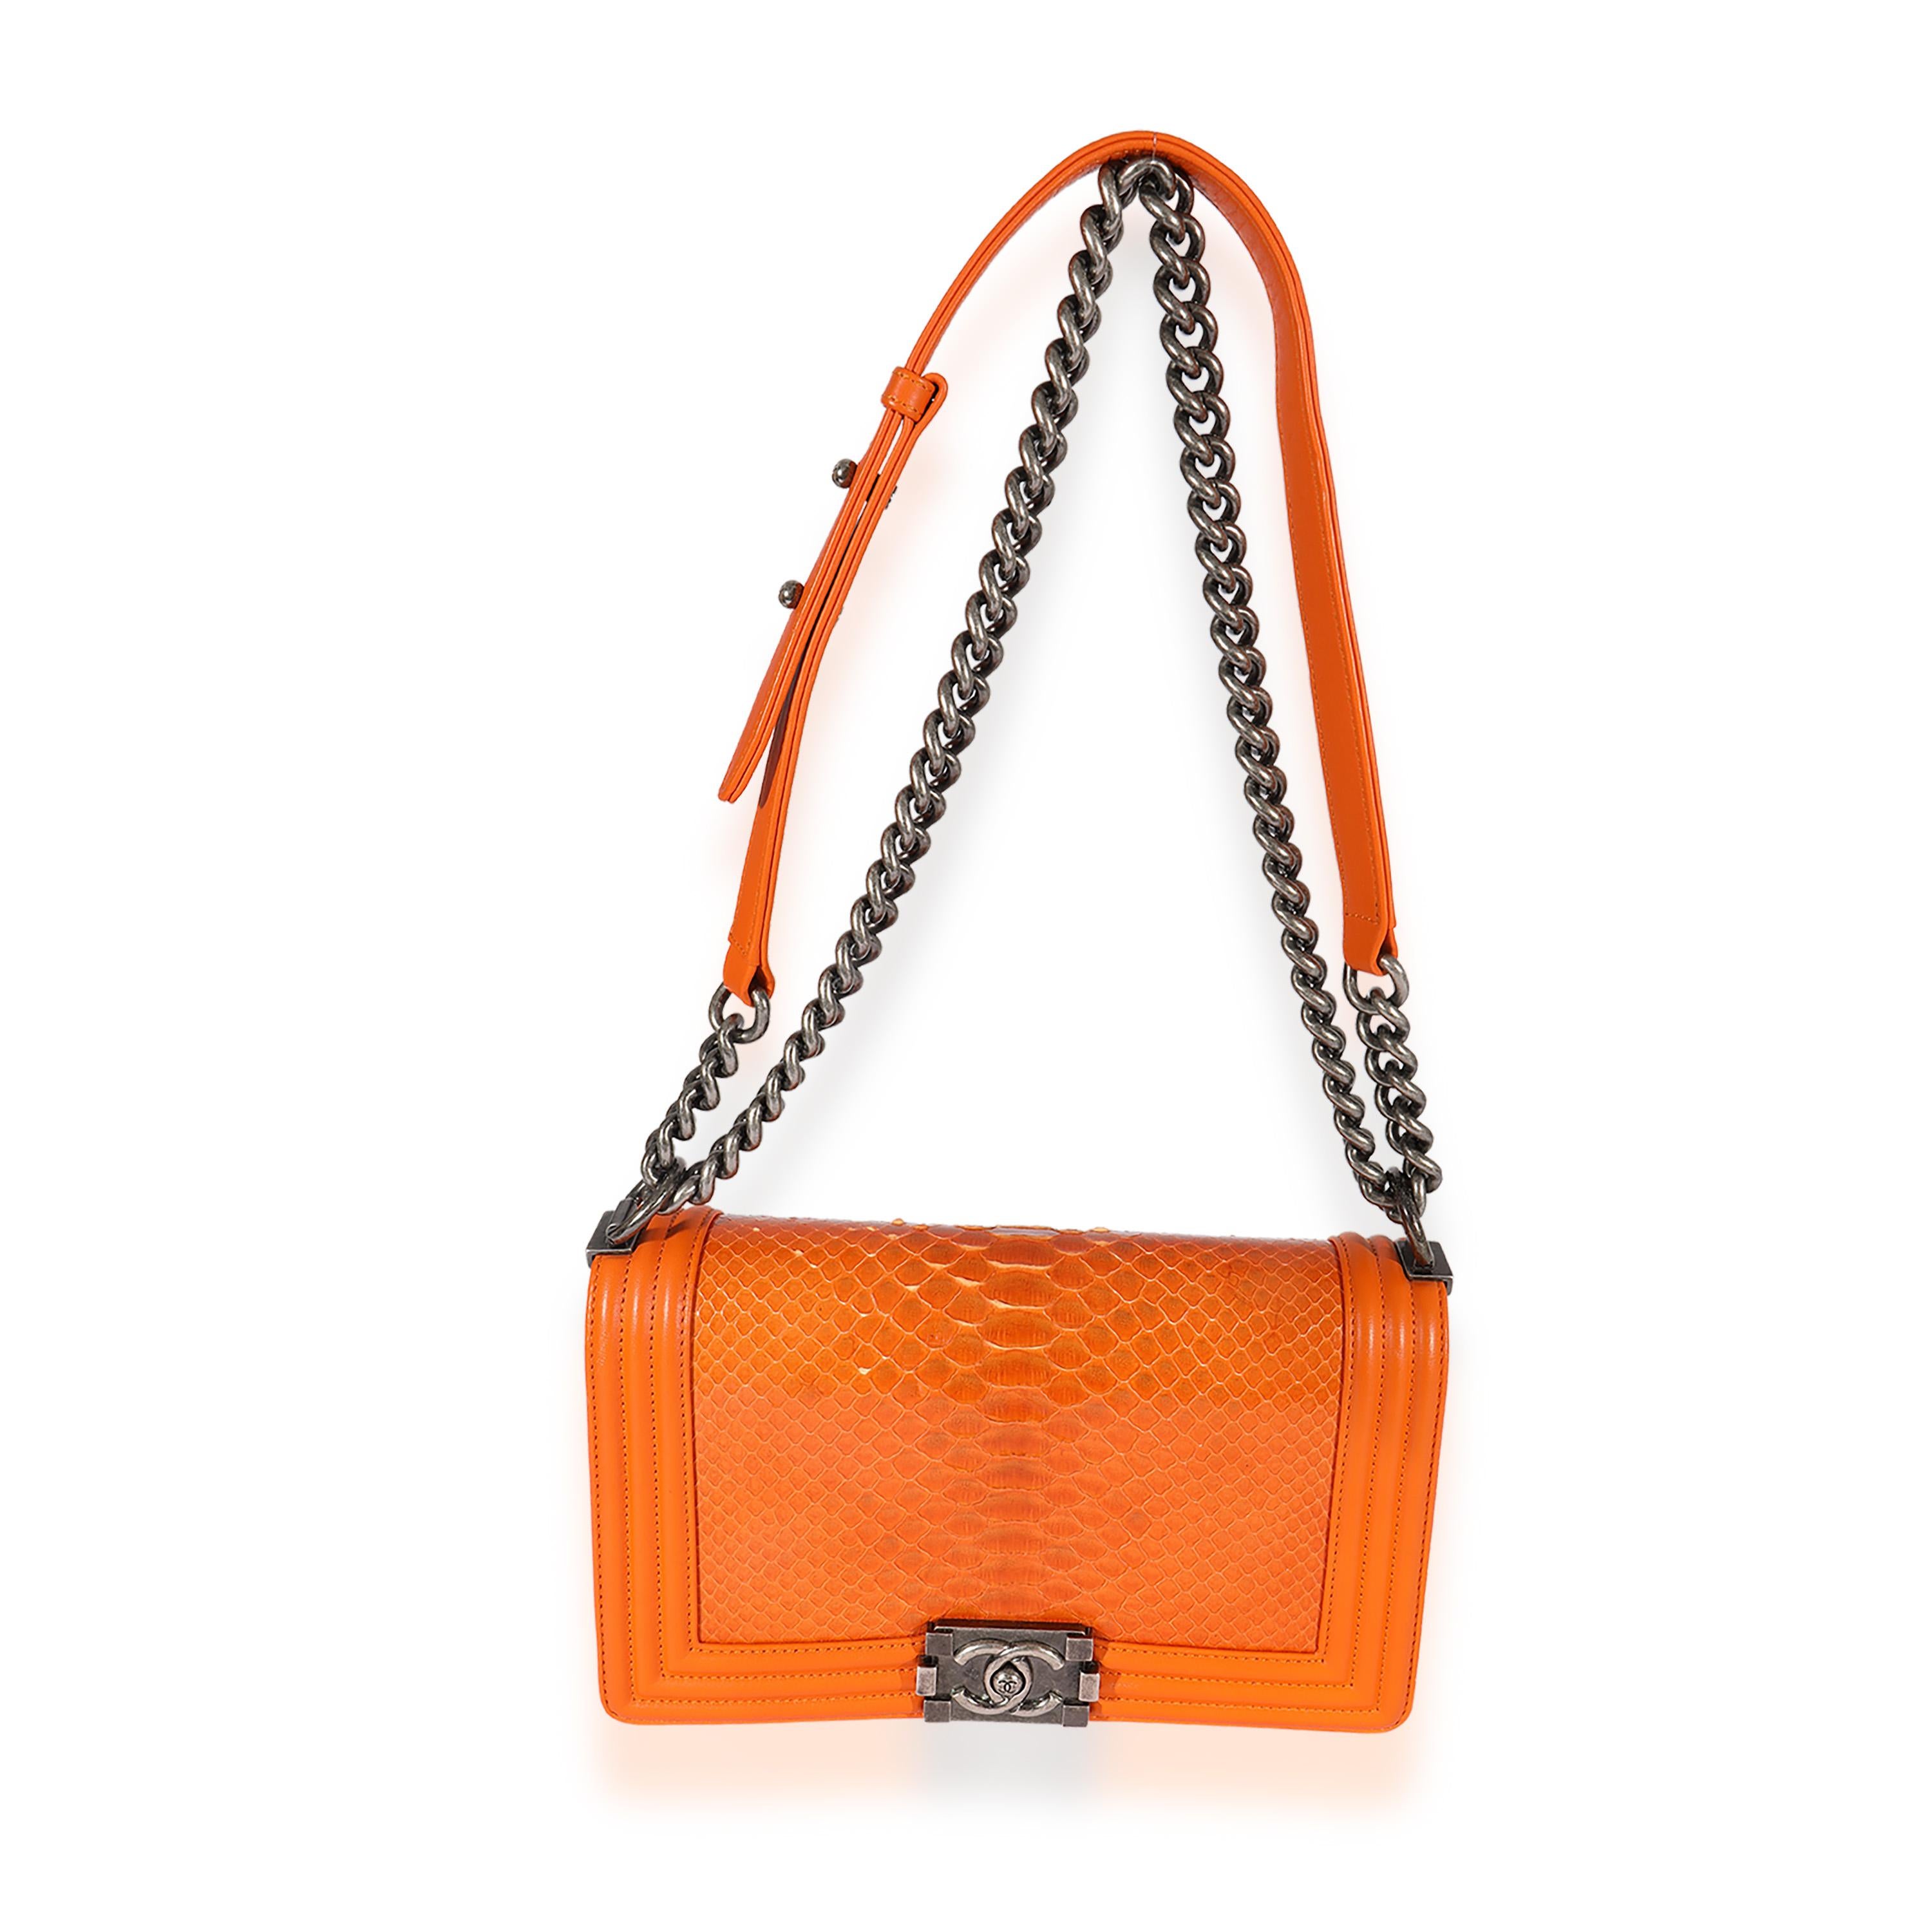 Listing Title: Chanel Orange Python Medium Boy Bag
SKU: 125528
Condition: Pre-owned 
Condition Description: An instant classic, the Boy bag from Chanel was introduced in 2011. The quilted bag was designed by the late Karl Lagerfeld, who was inspired